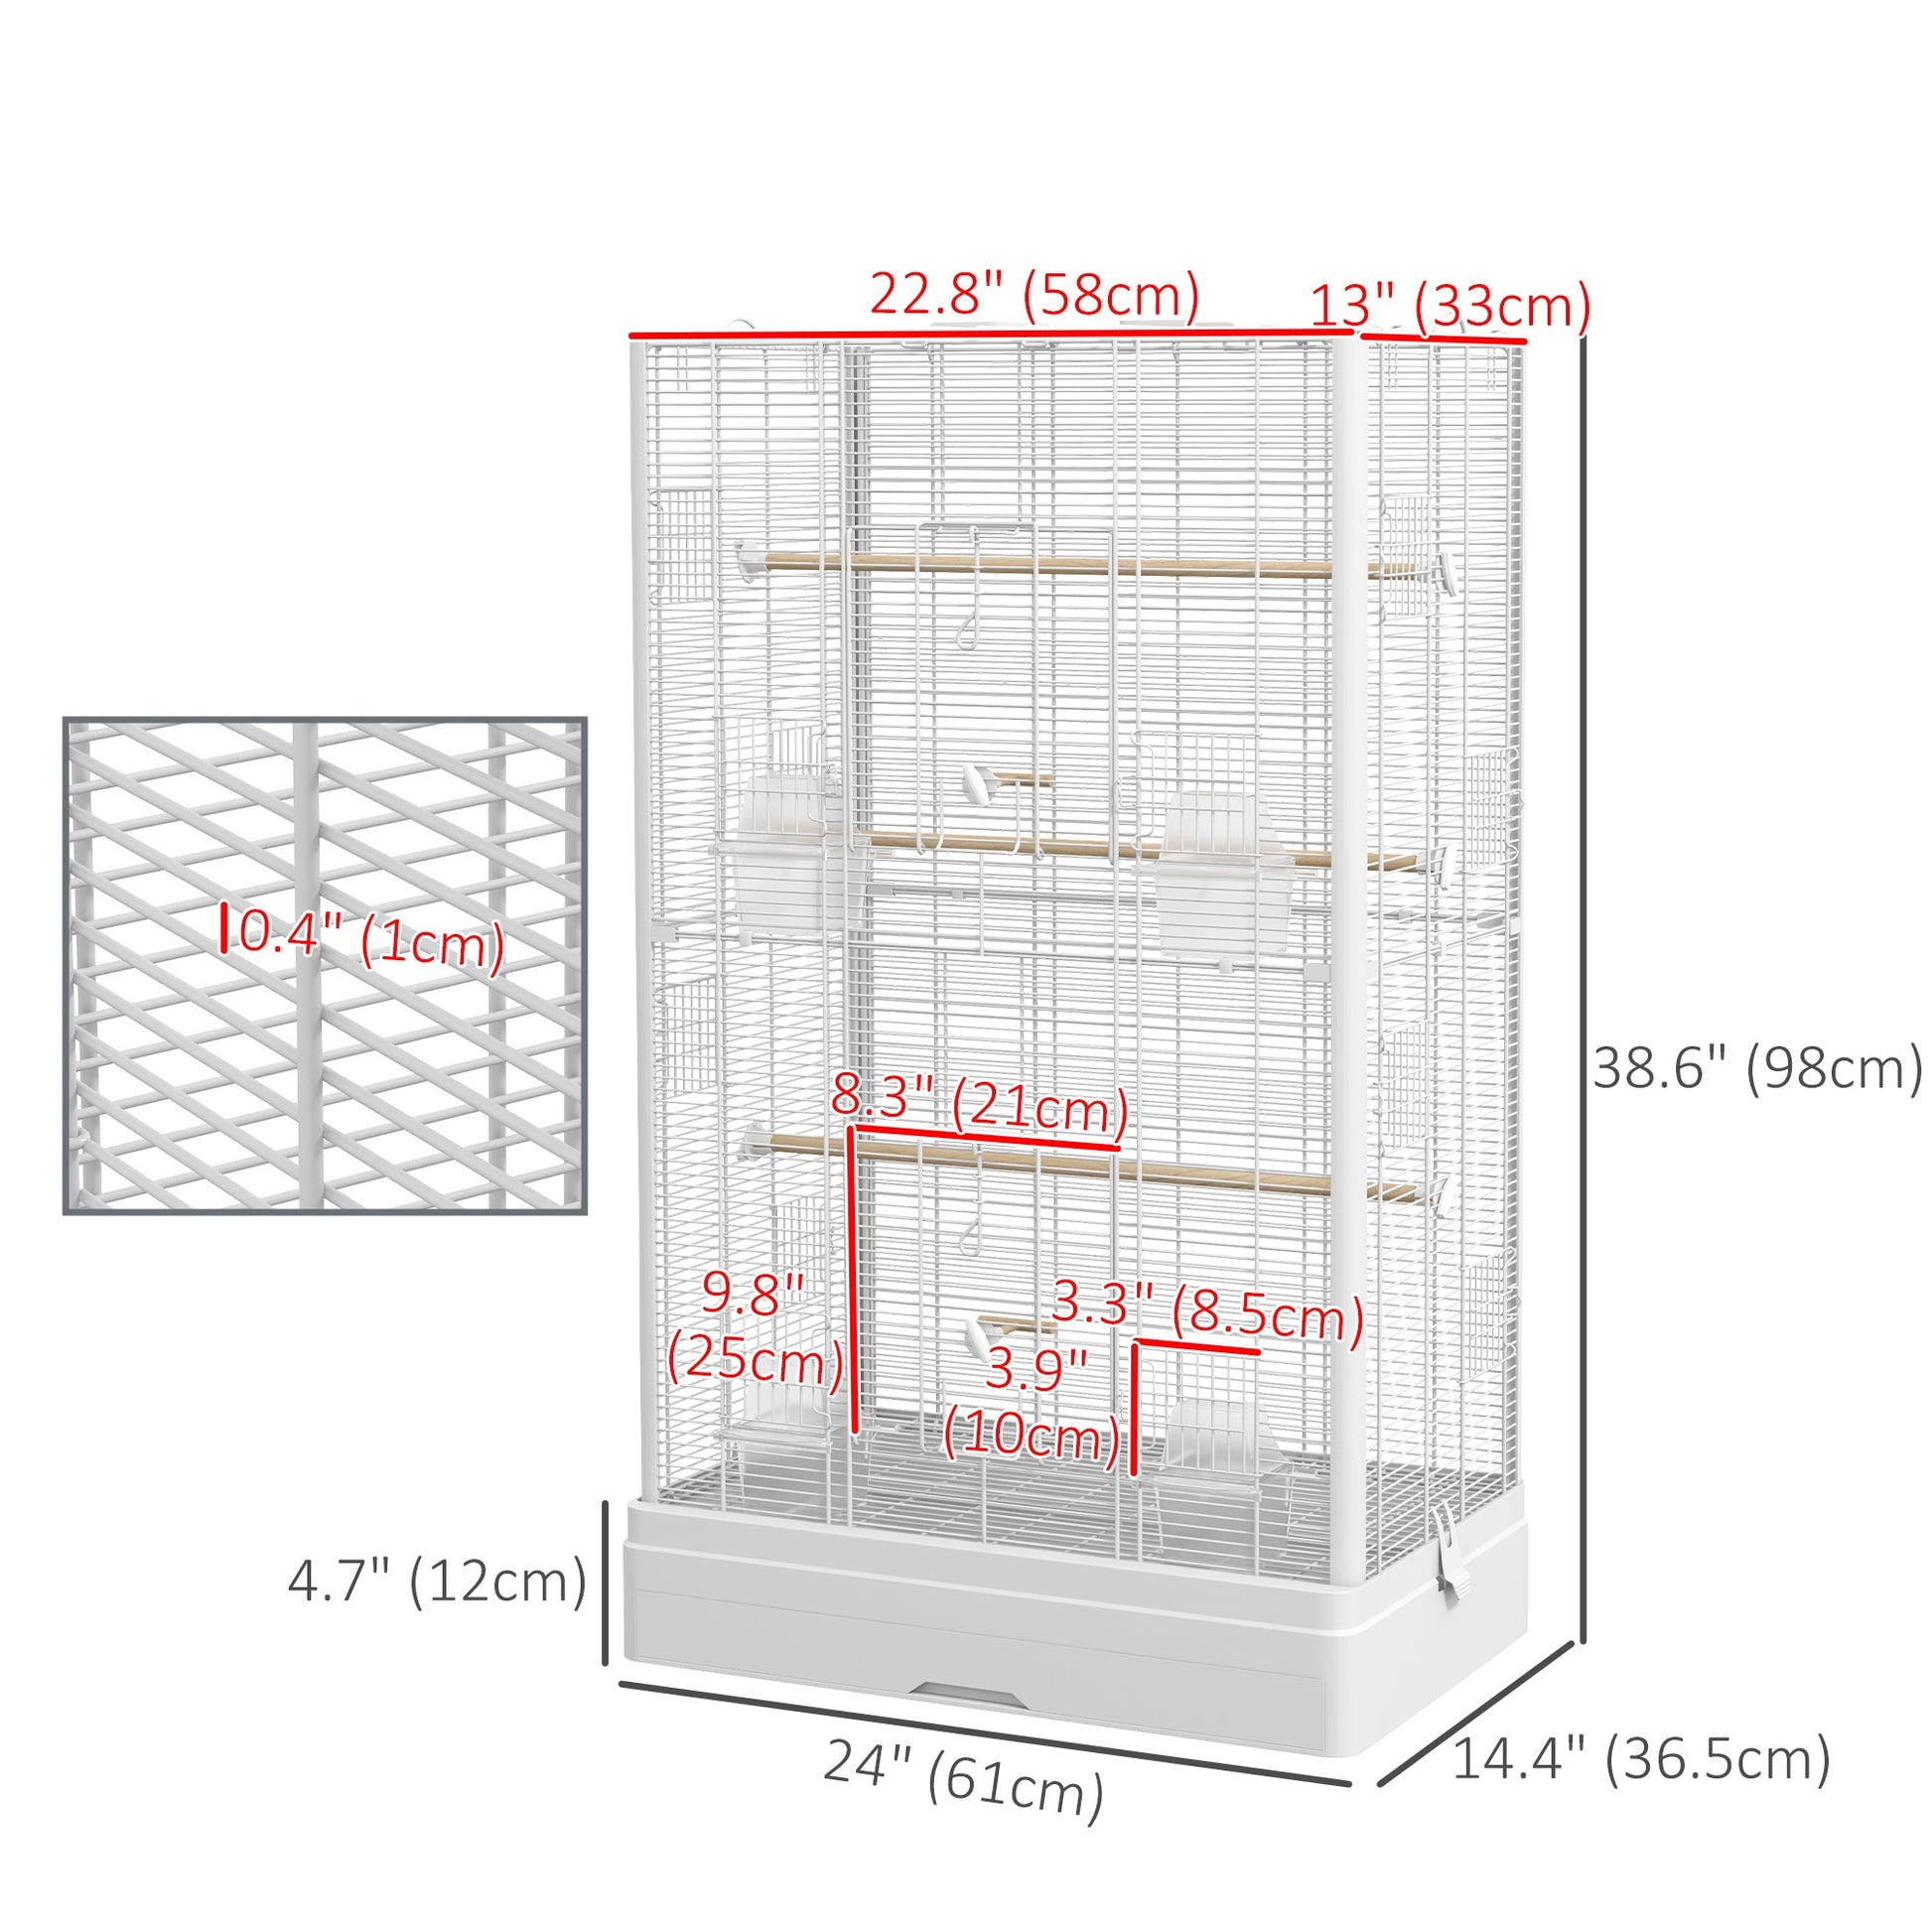 39" Bird Cage for Budgie Finches Canaries Love Birds with Wooden Stands, Slide-Out Tray, Handles, Food Containers, White at Gallery Canada